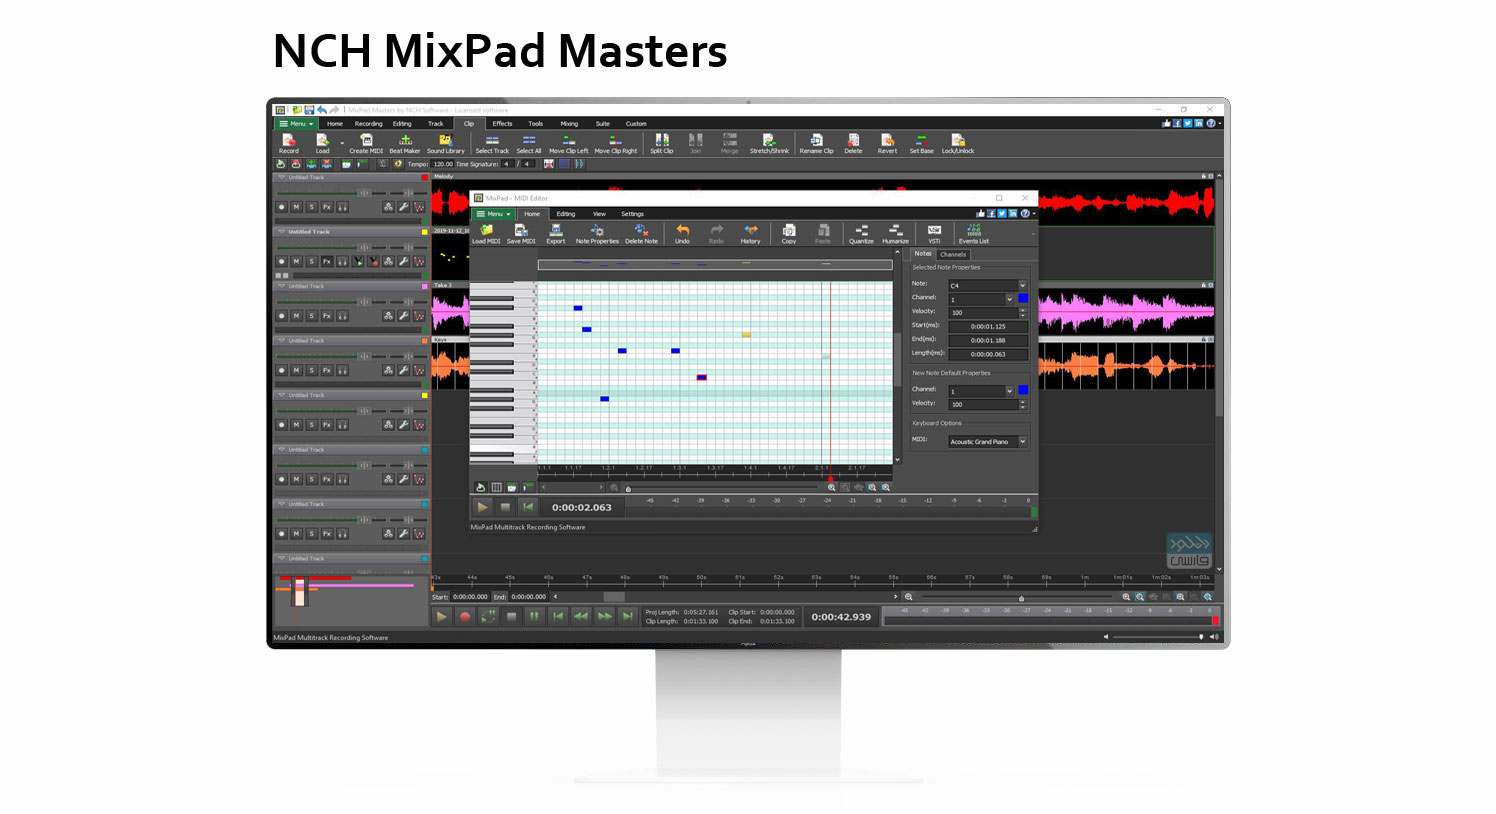 download the new for android NCH MixPad Masters Edition 10.85